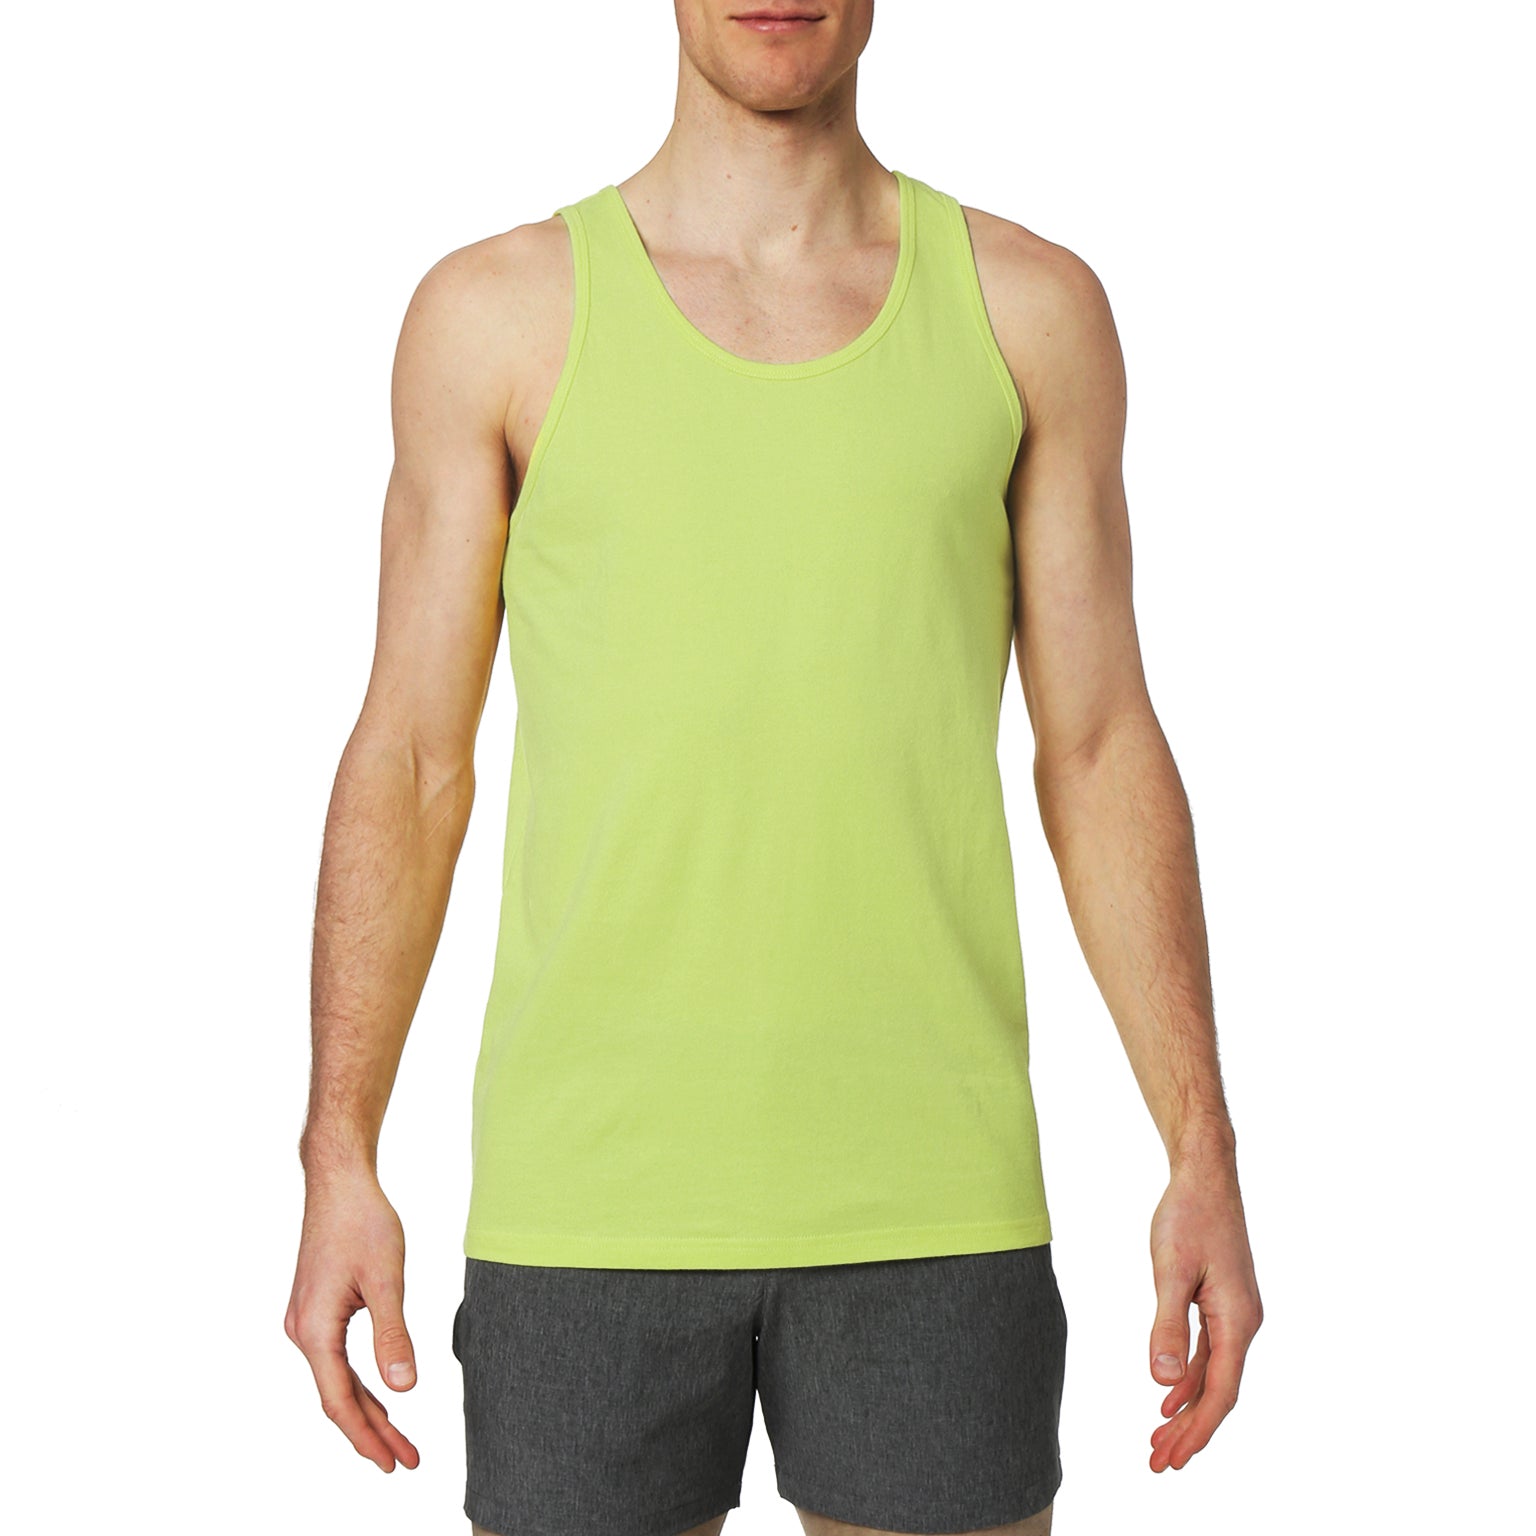 SAVE 70%- ACTIONWEAR Citron Solid Cotton Tank Top